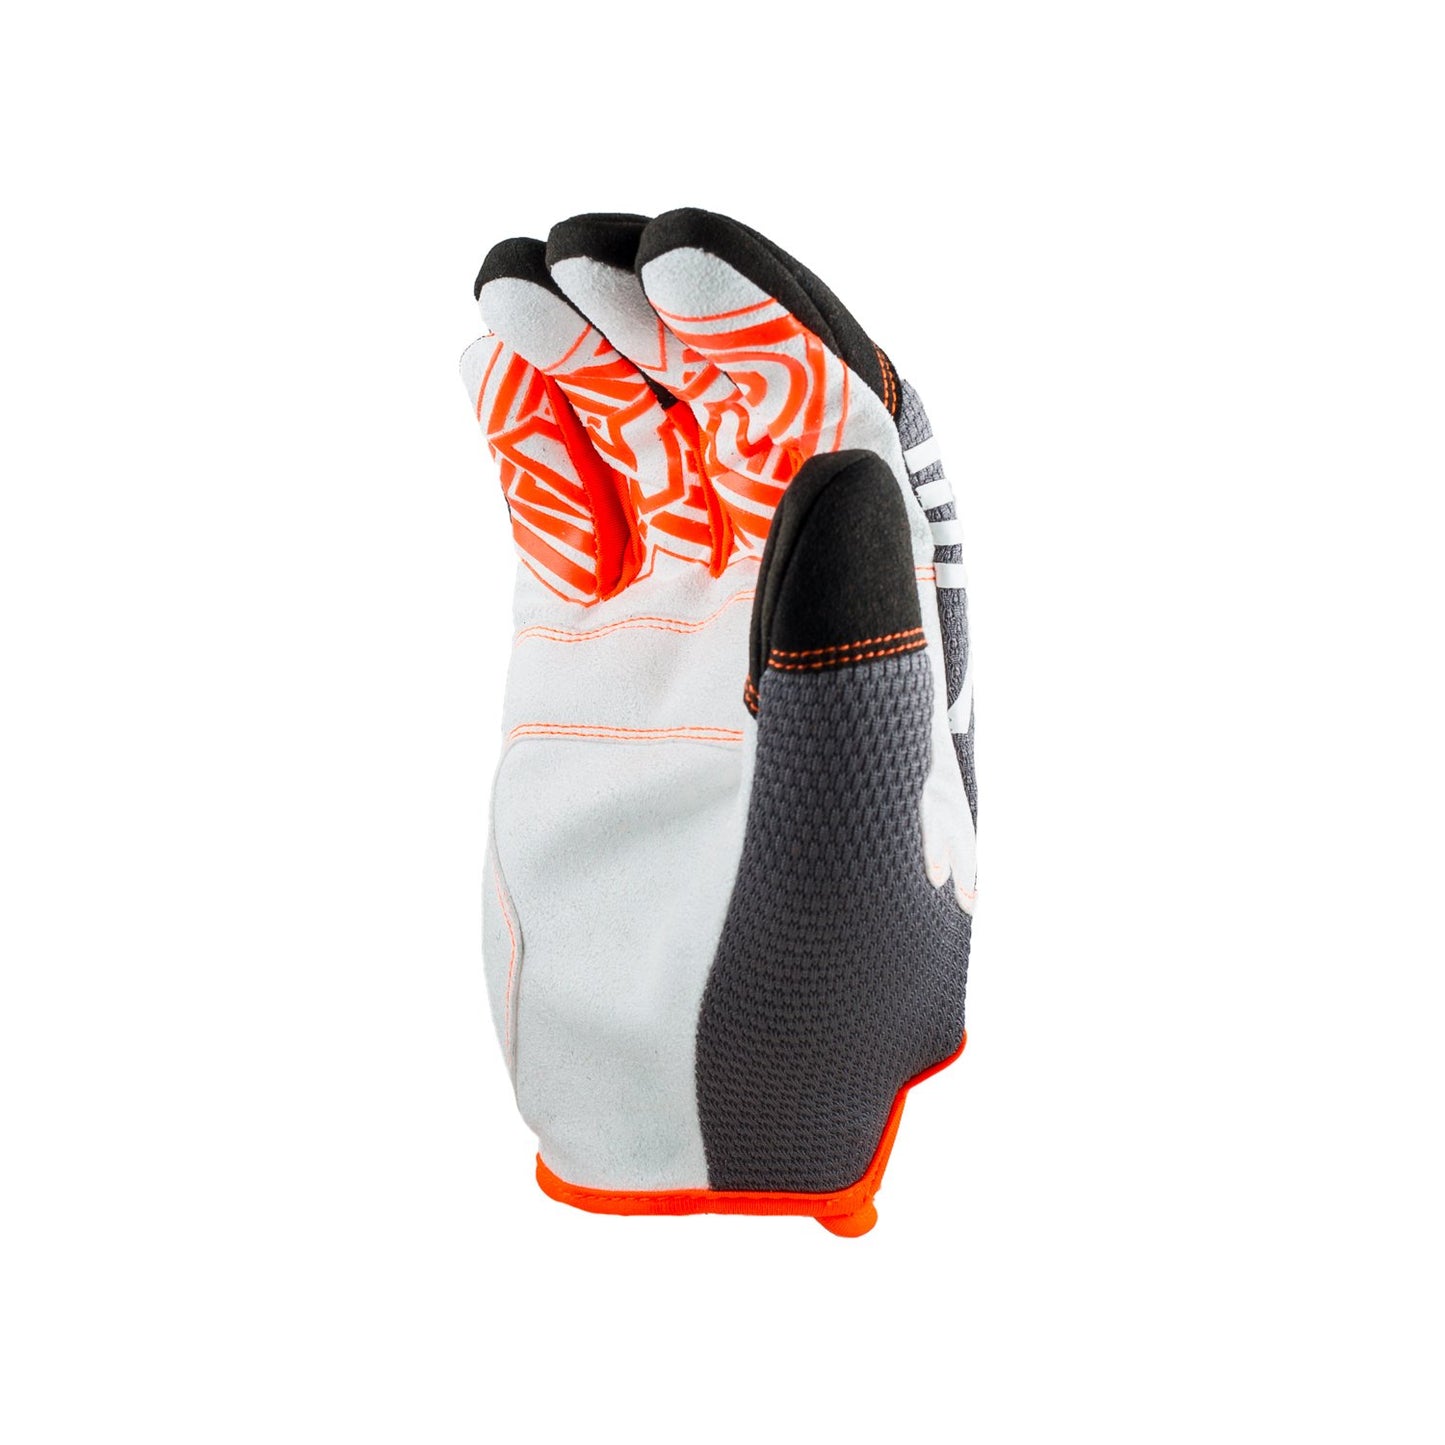 WTD Off-Road Doonies Smartglove with cooling technology